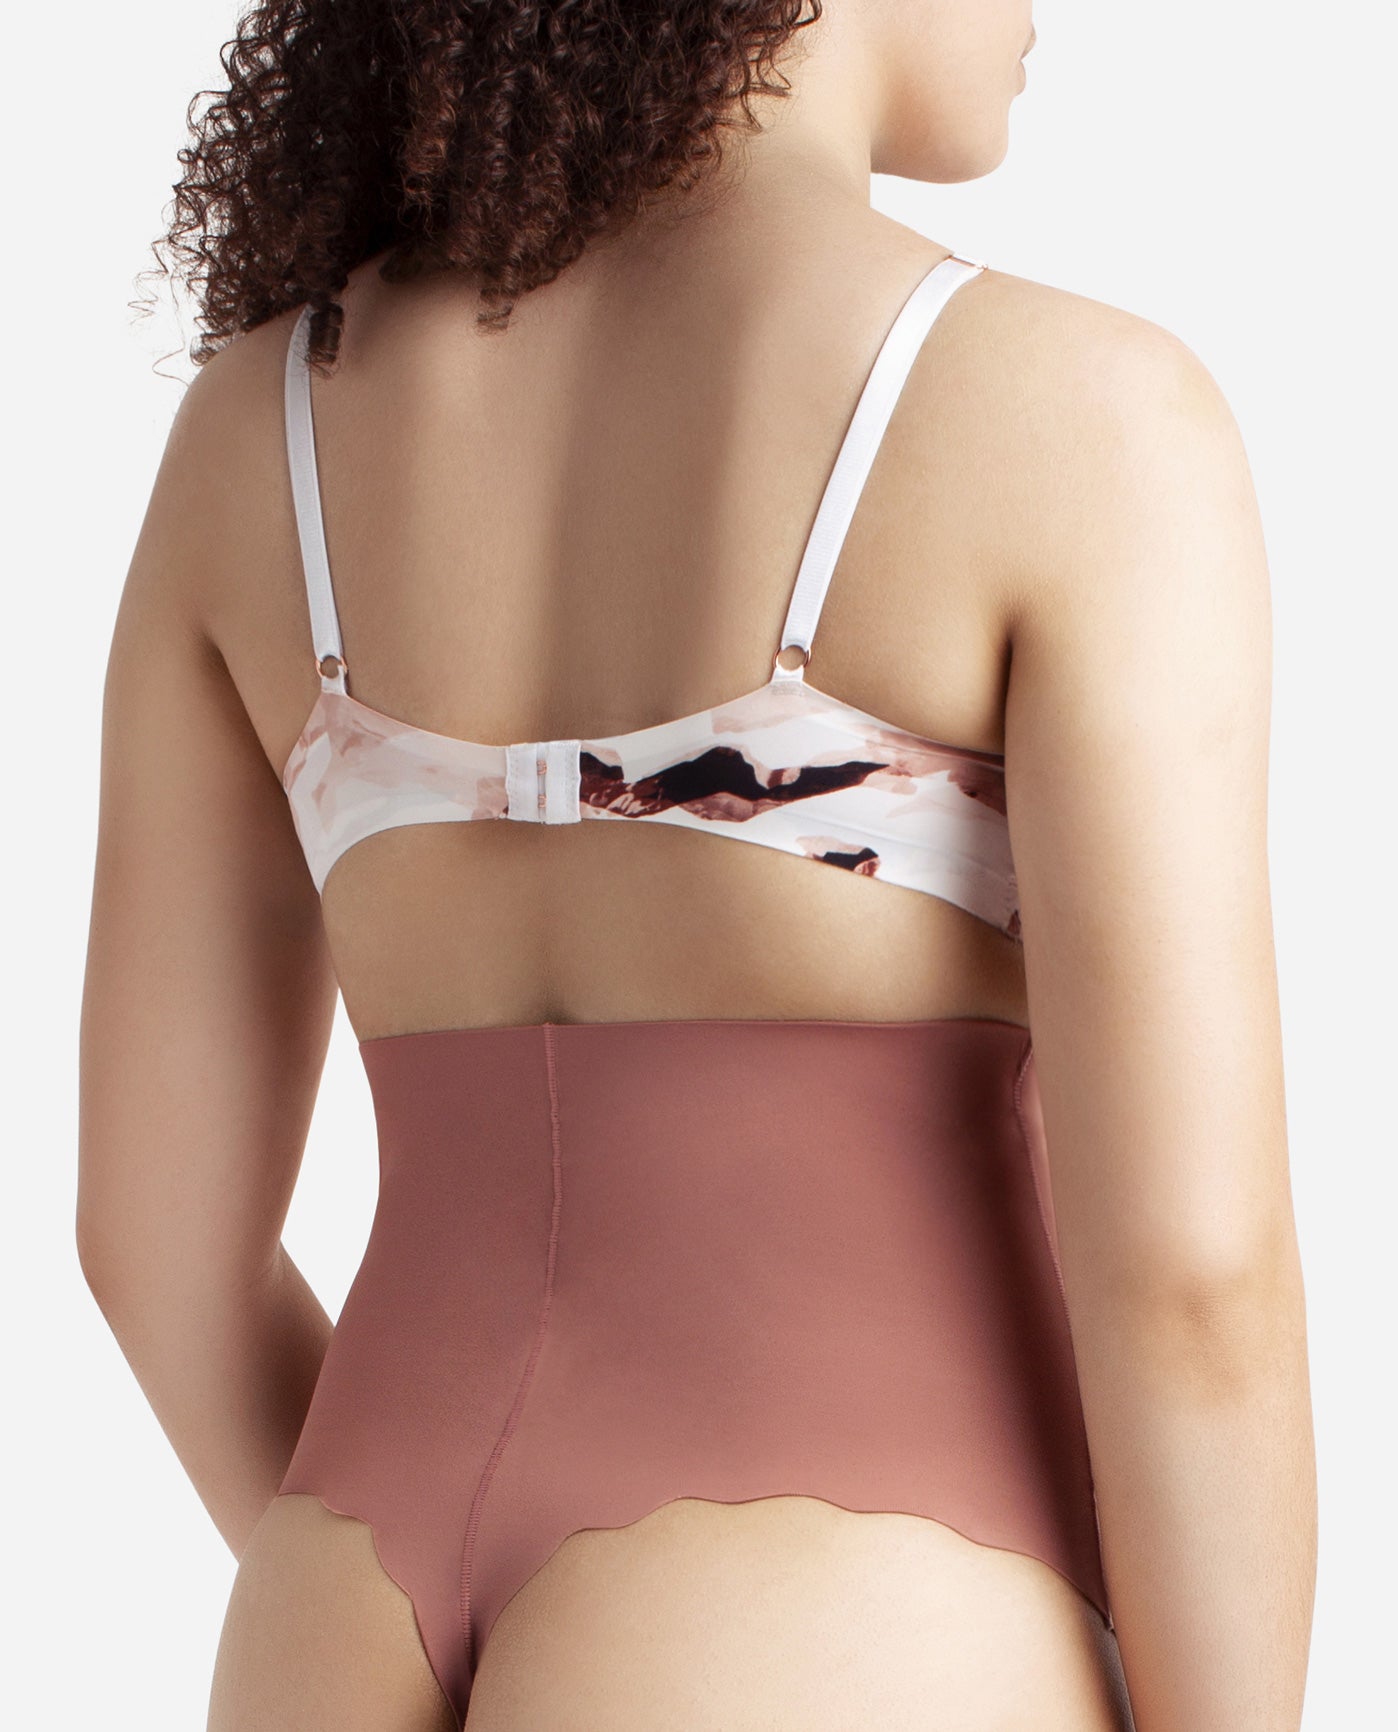 Women's Underwear with Thin Ribbon and Wooden Ear Edge Satin